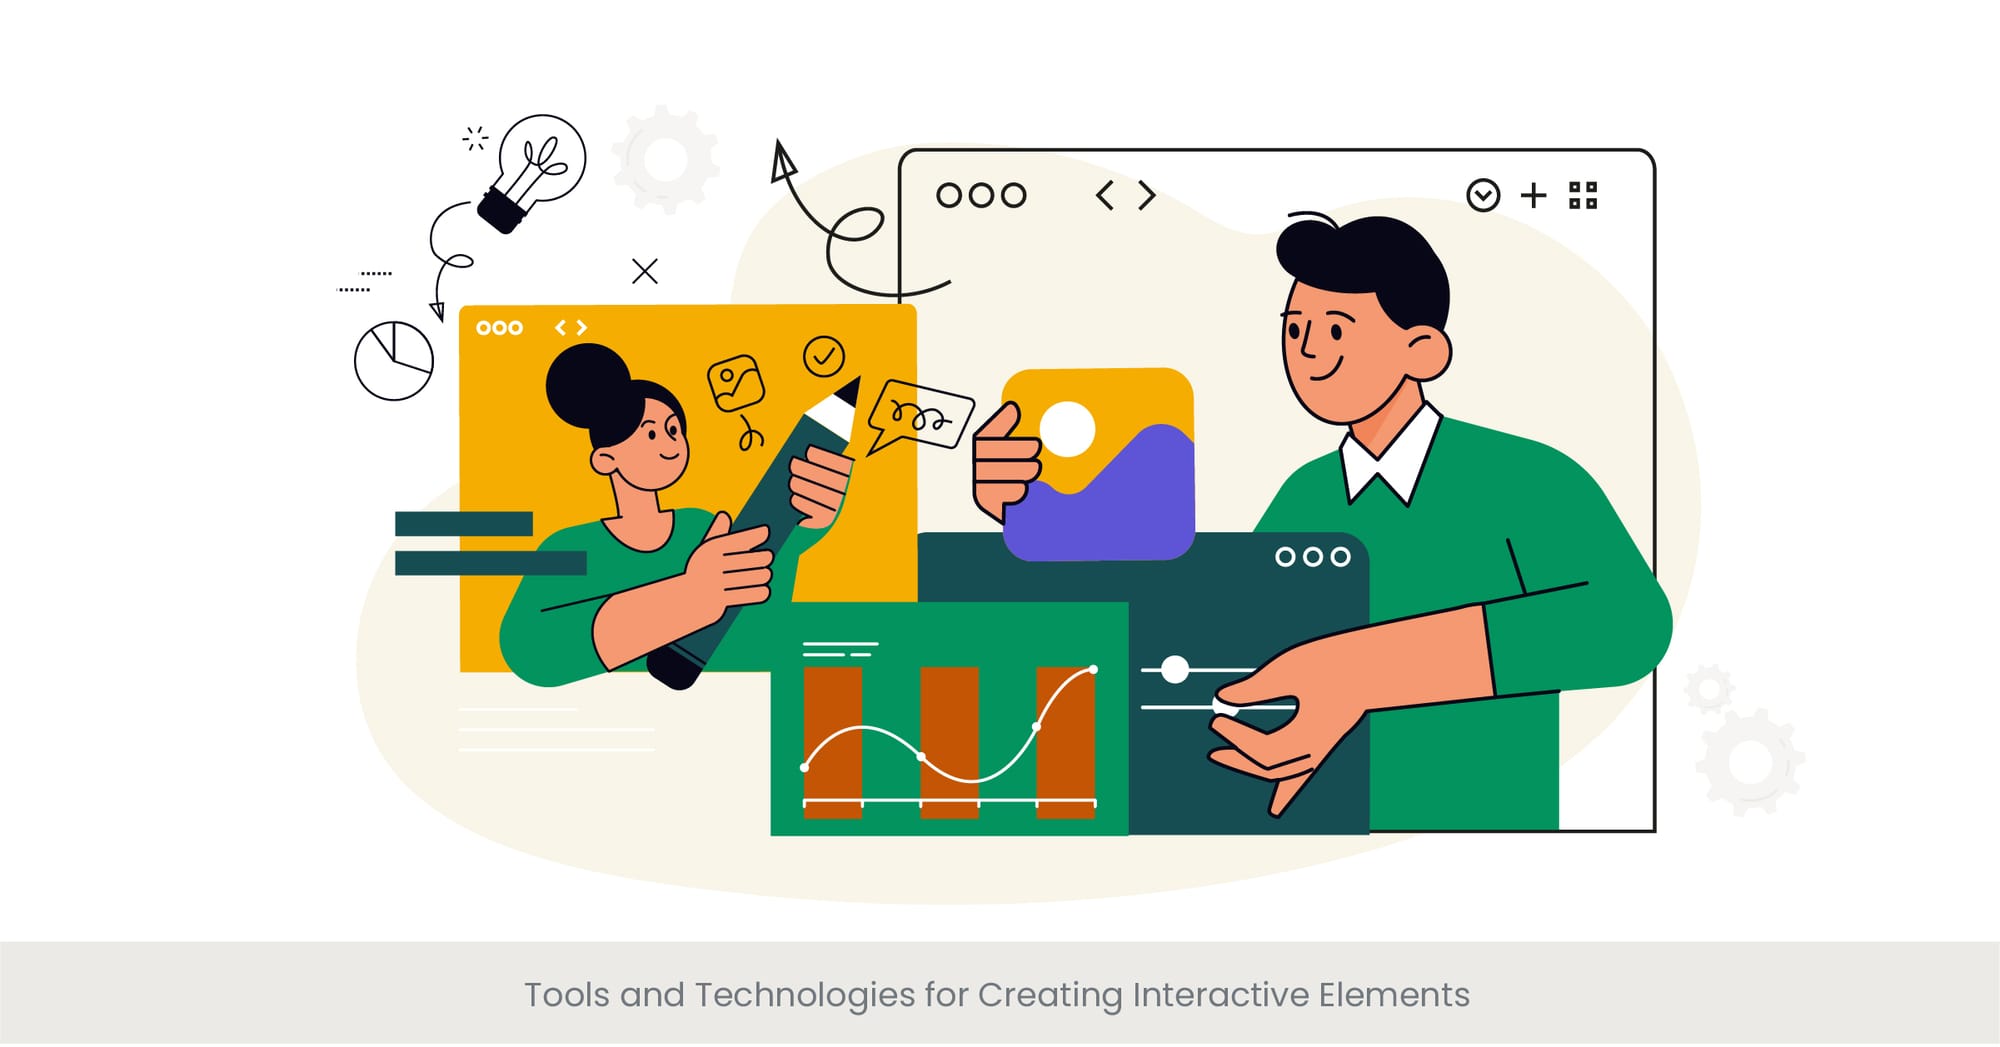 Tools and Technologies for Creating Interactive Elements